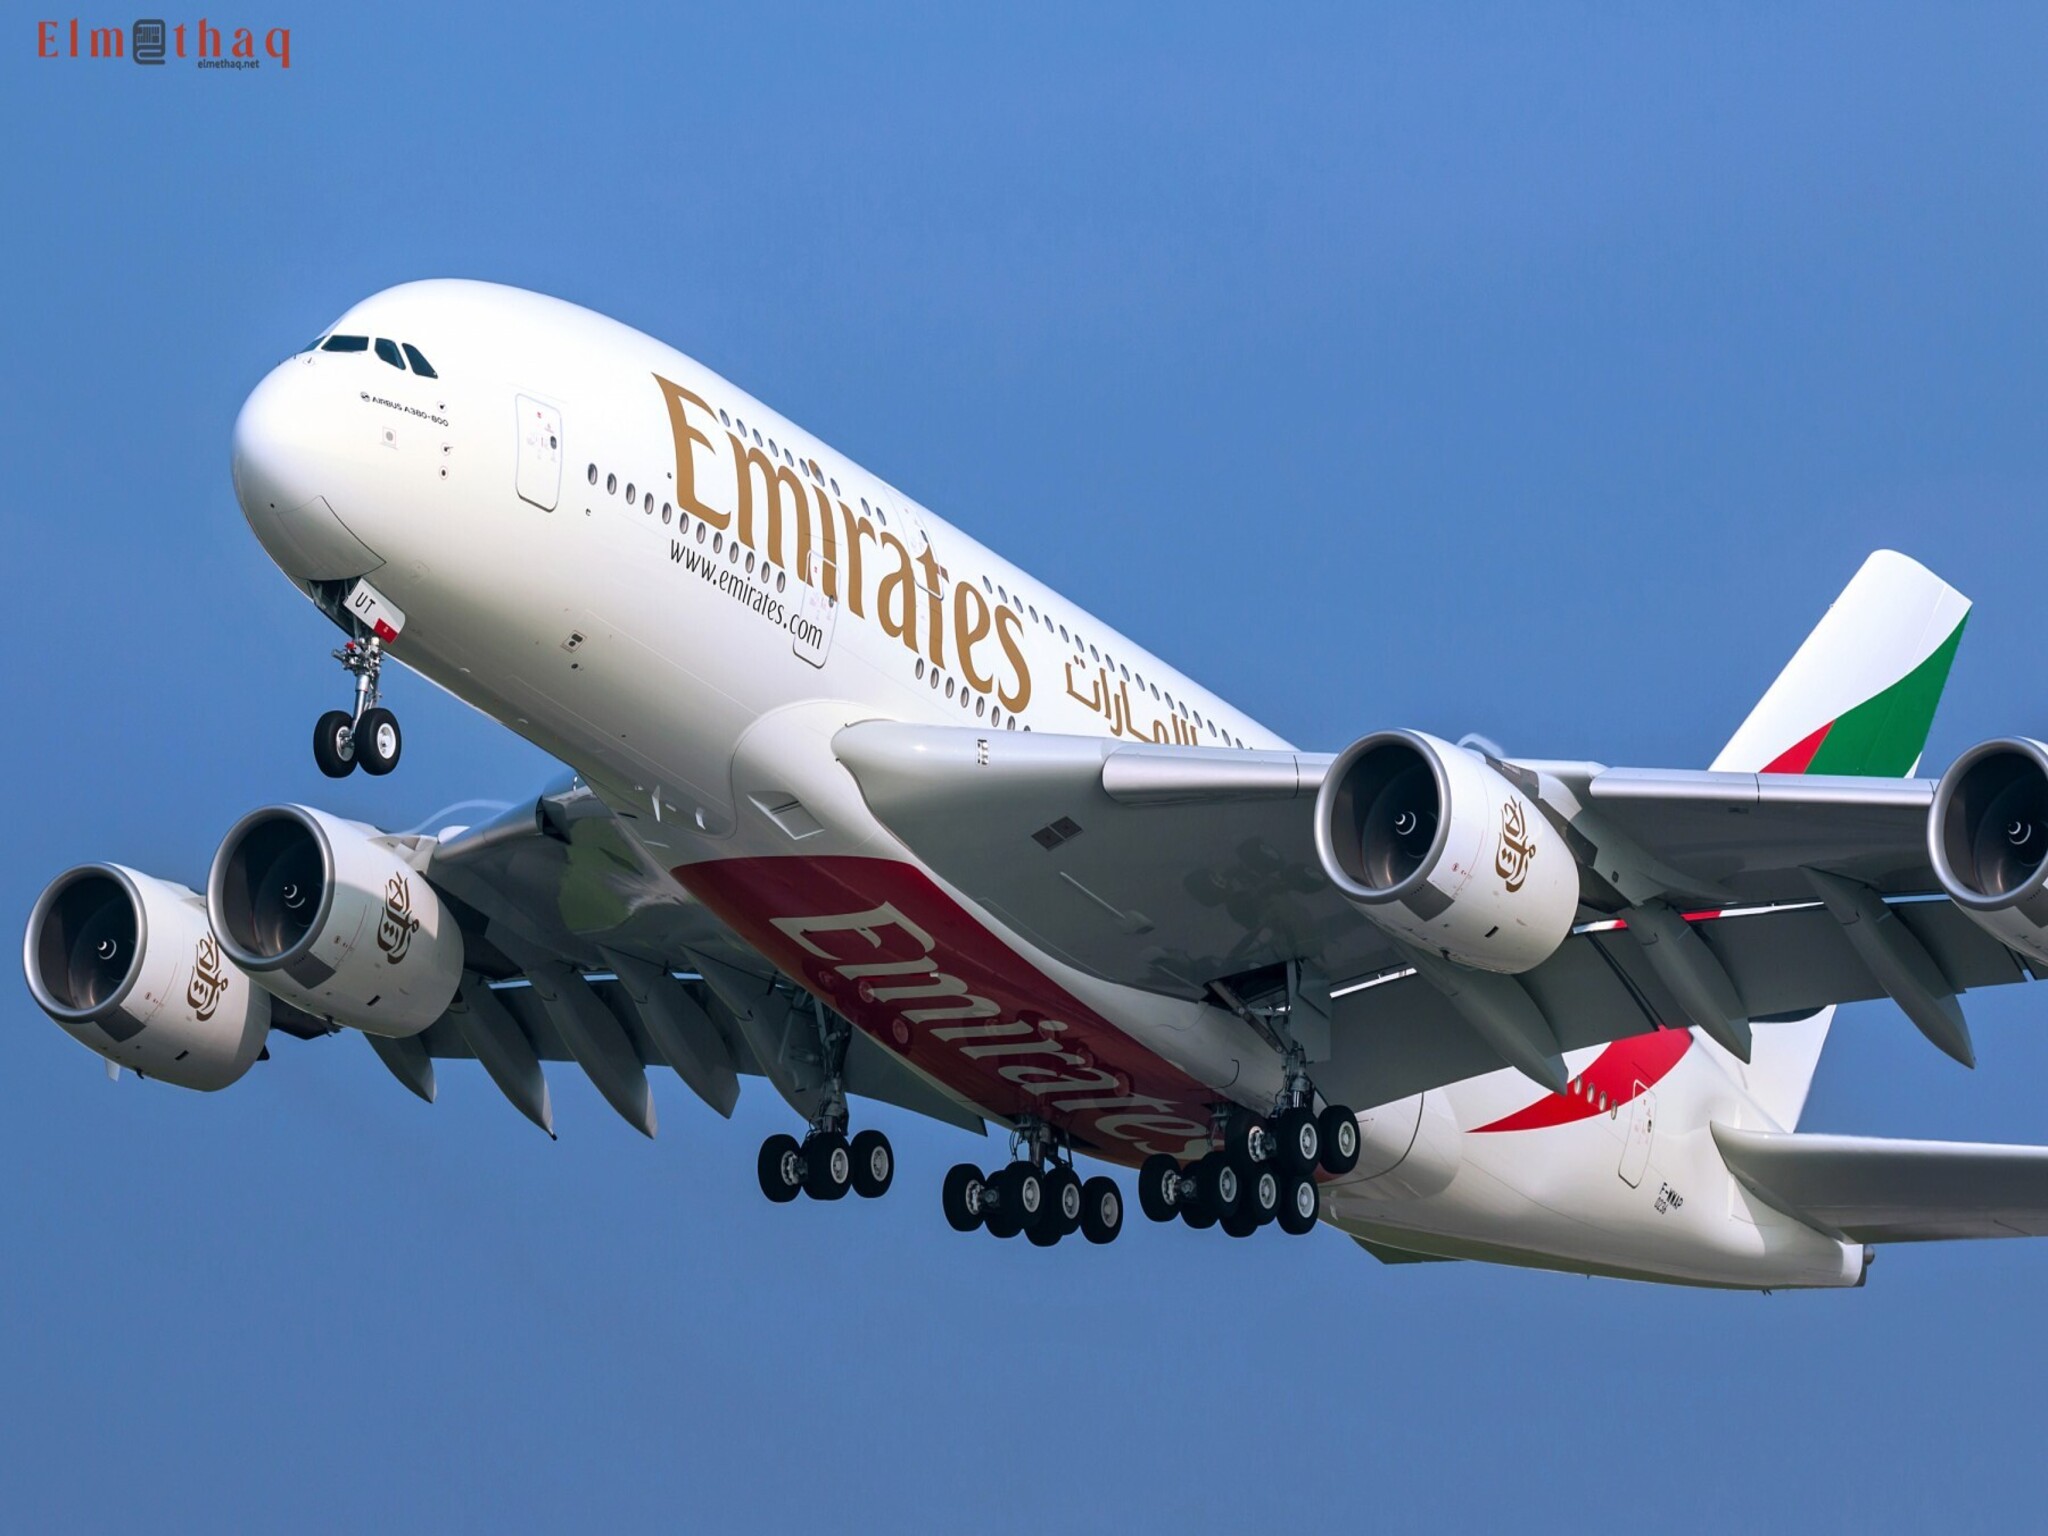 Emirates Airlines announces the relocation of operations to Al Maktoum Airport